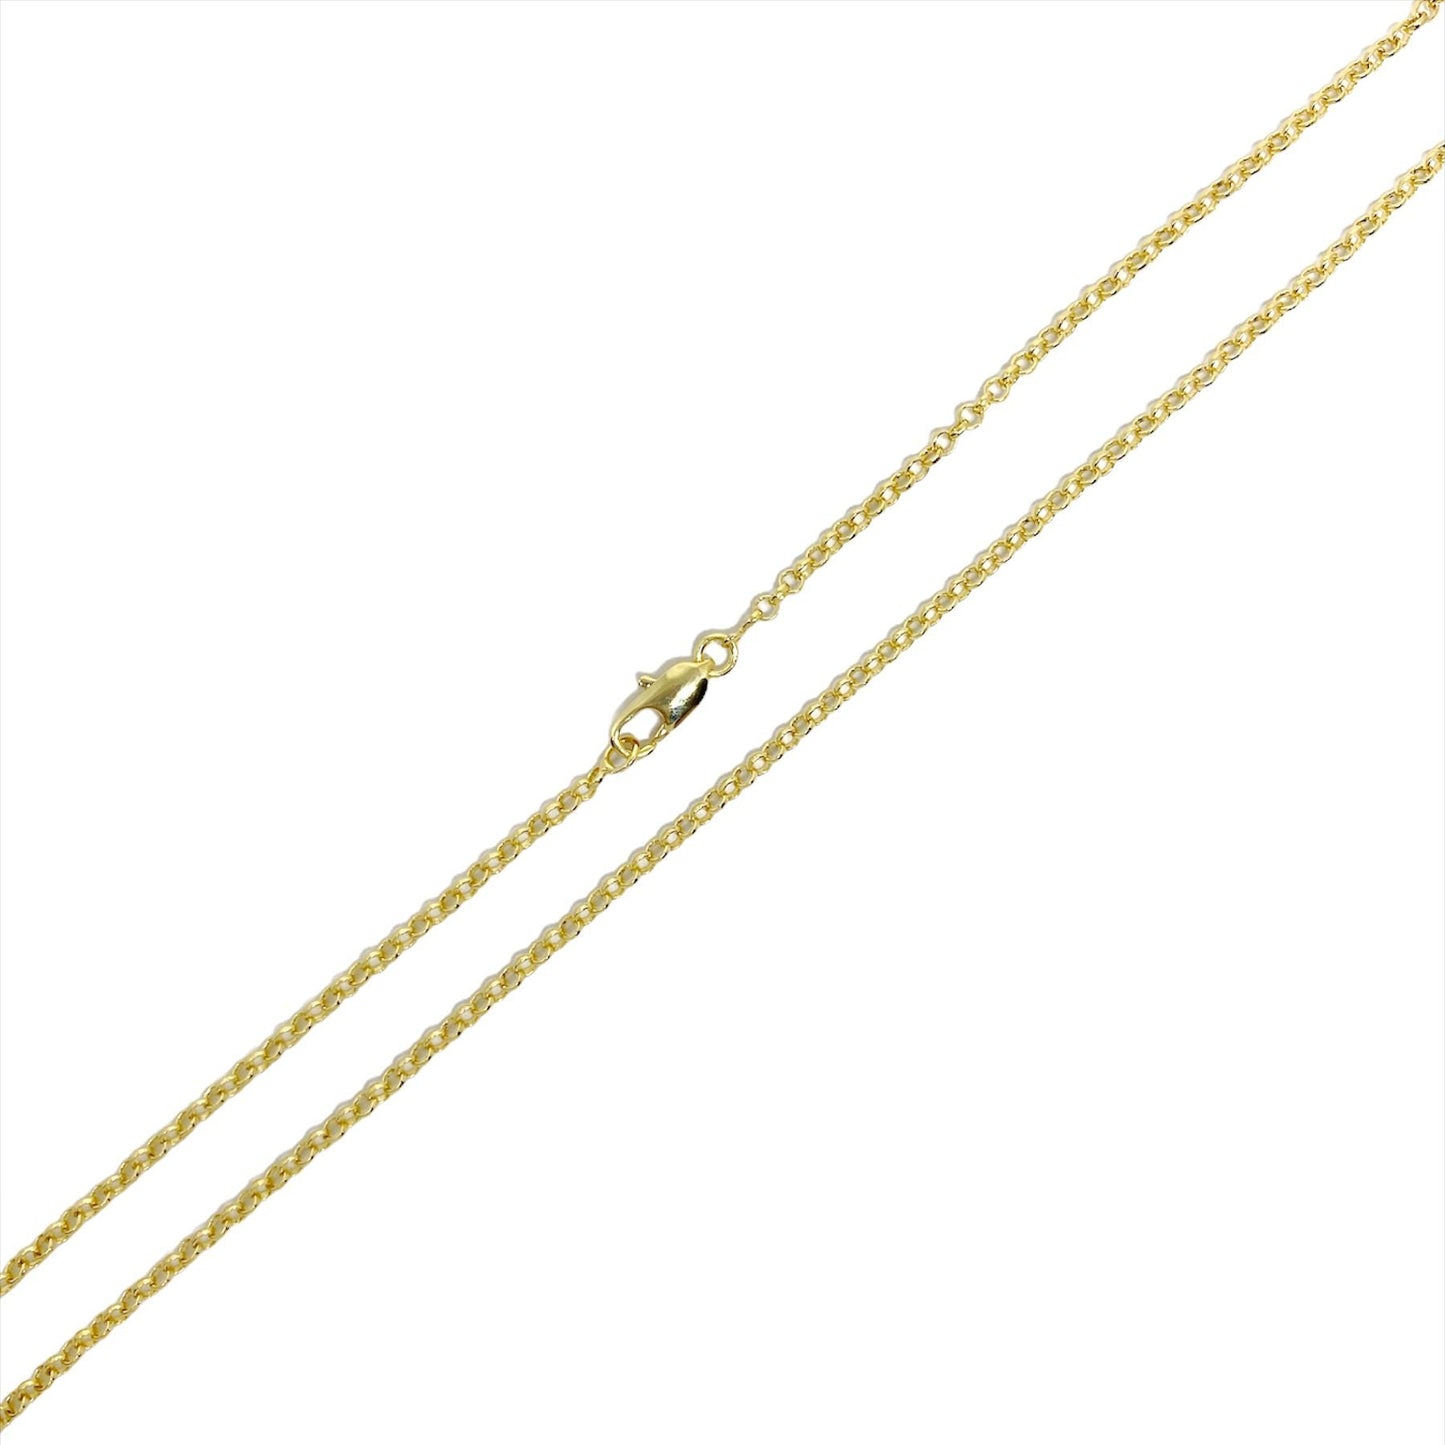 18k Gold Filled 2.5mm Rolo Chain Available in 16", 18", 20", 24"